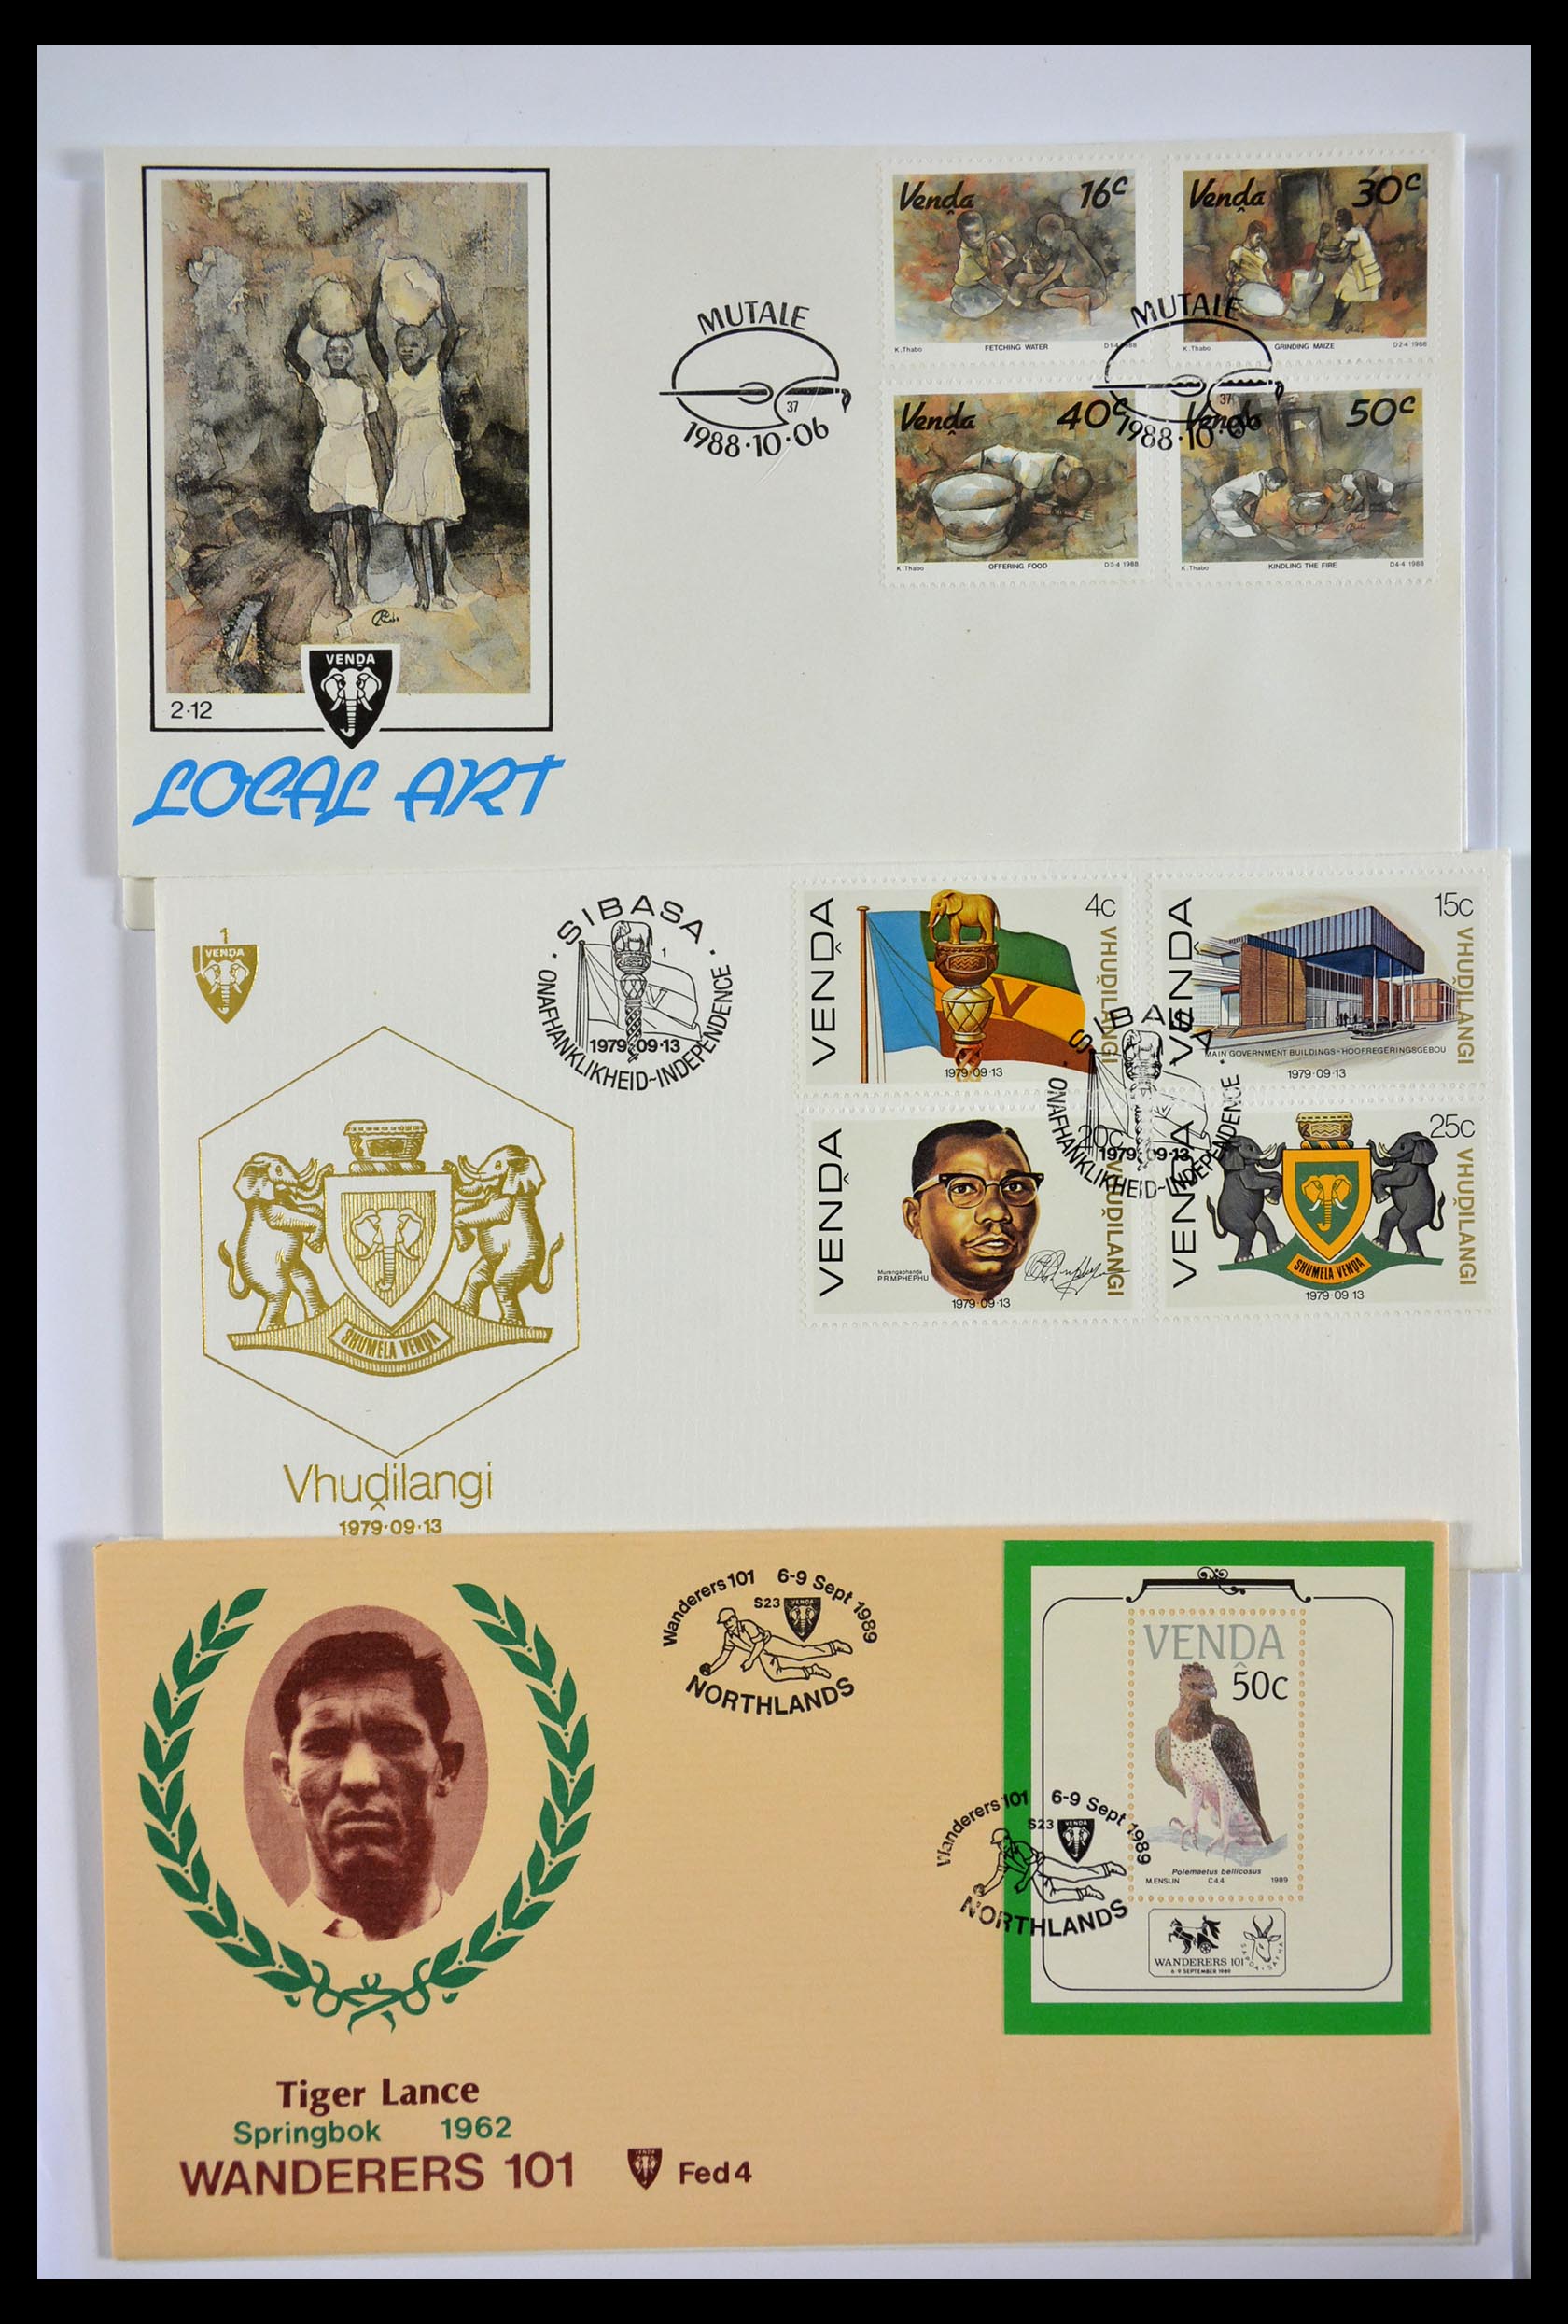 29356 560 - 29356 South Africa homelands first day covers 1979-1991.